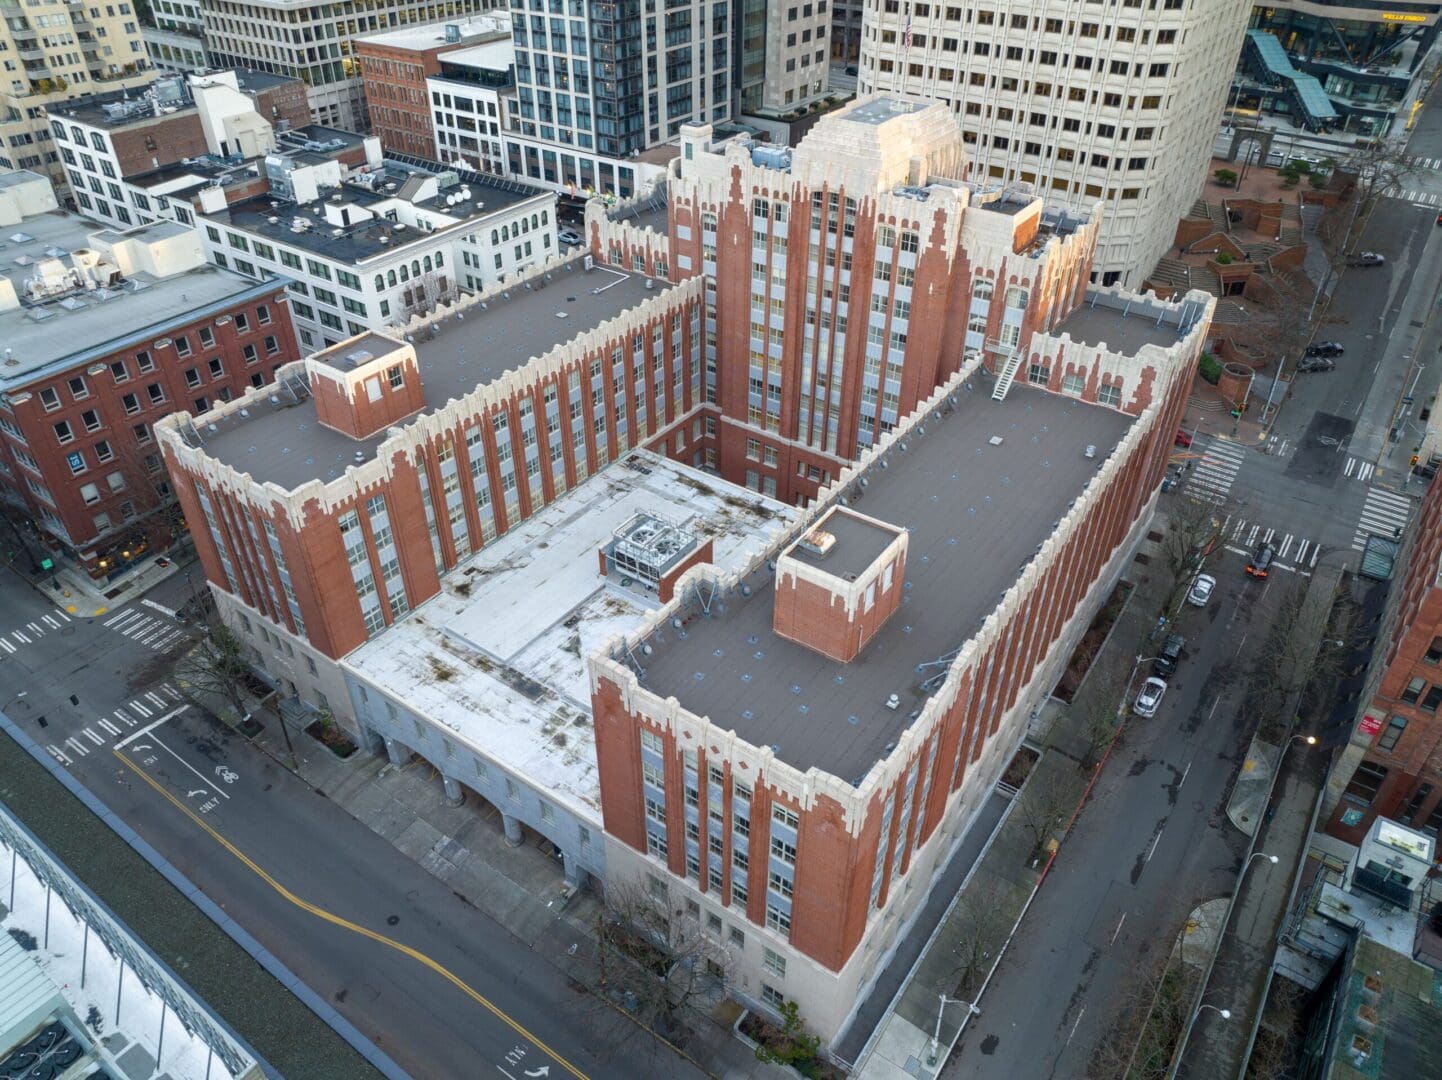 An aerial view of a brick building in a city.